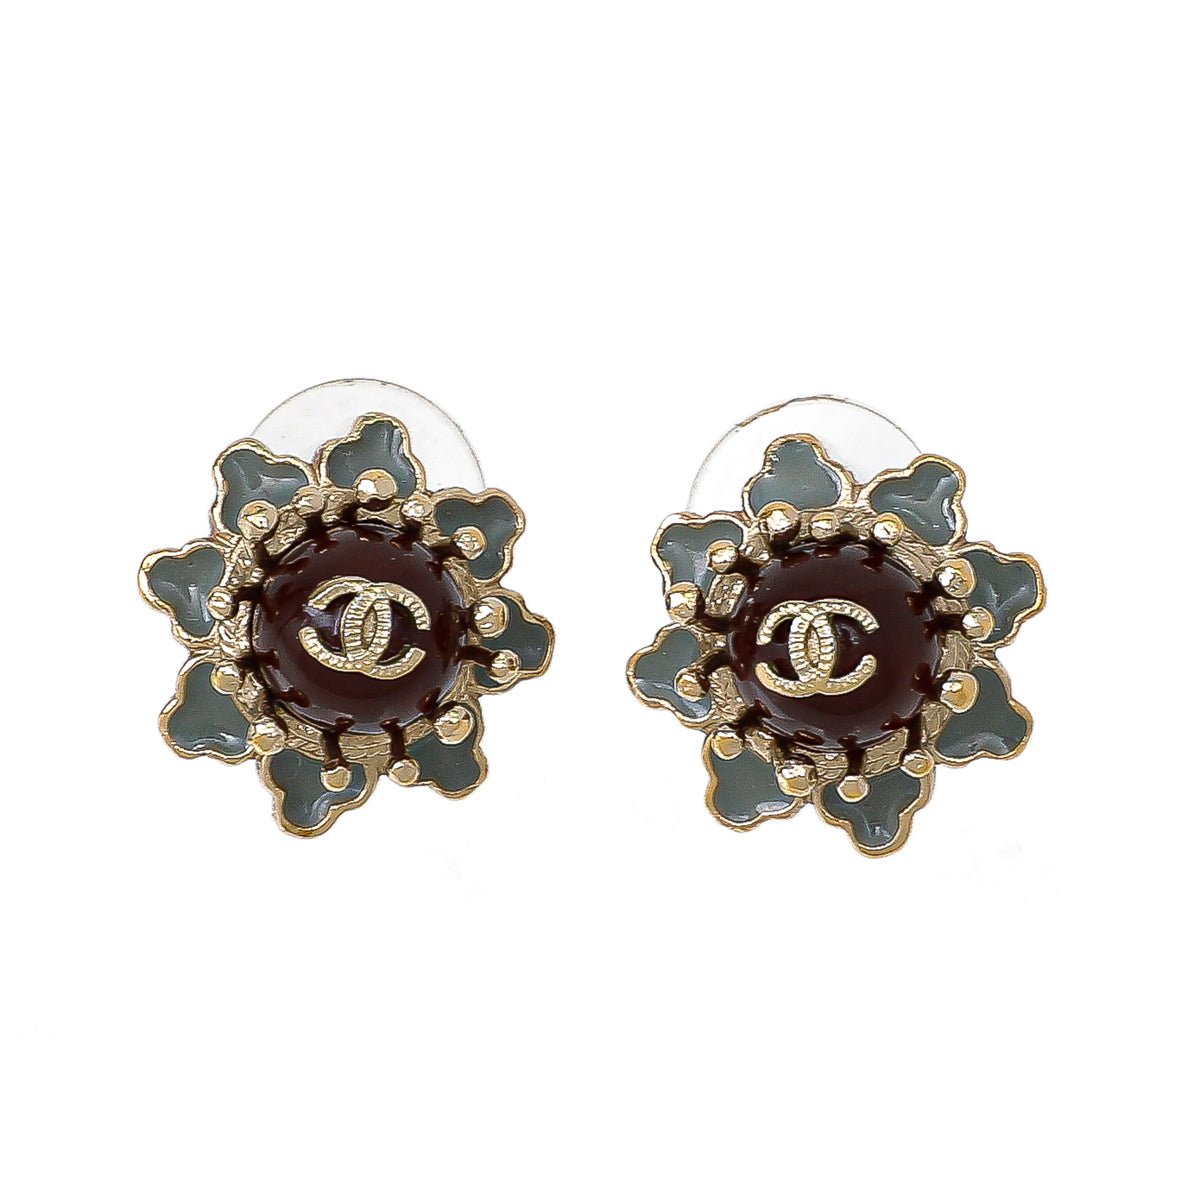 The Closet - Chanel Bicolor CC Pearl Crown Earrings | The Closet